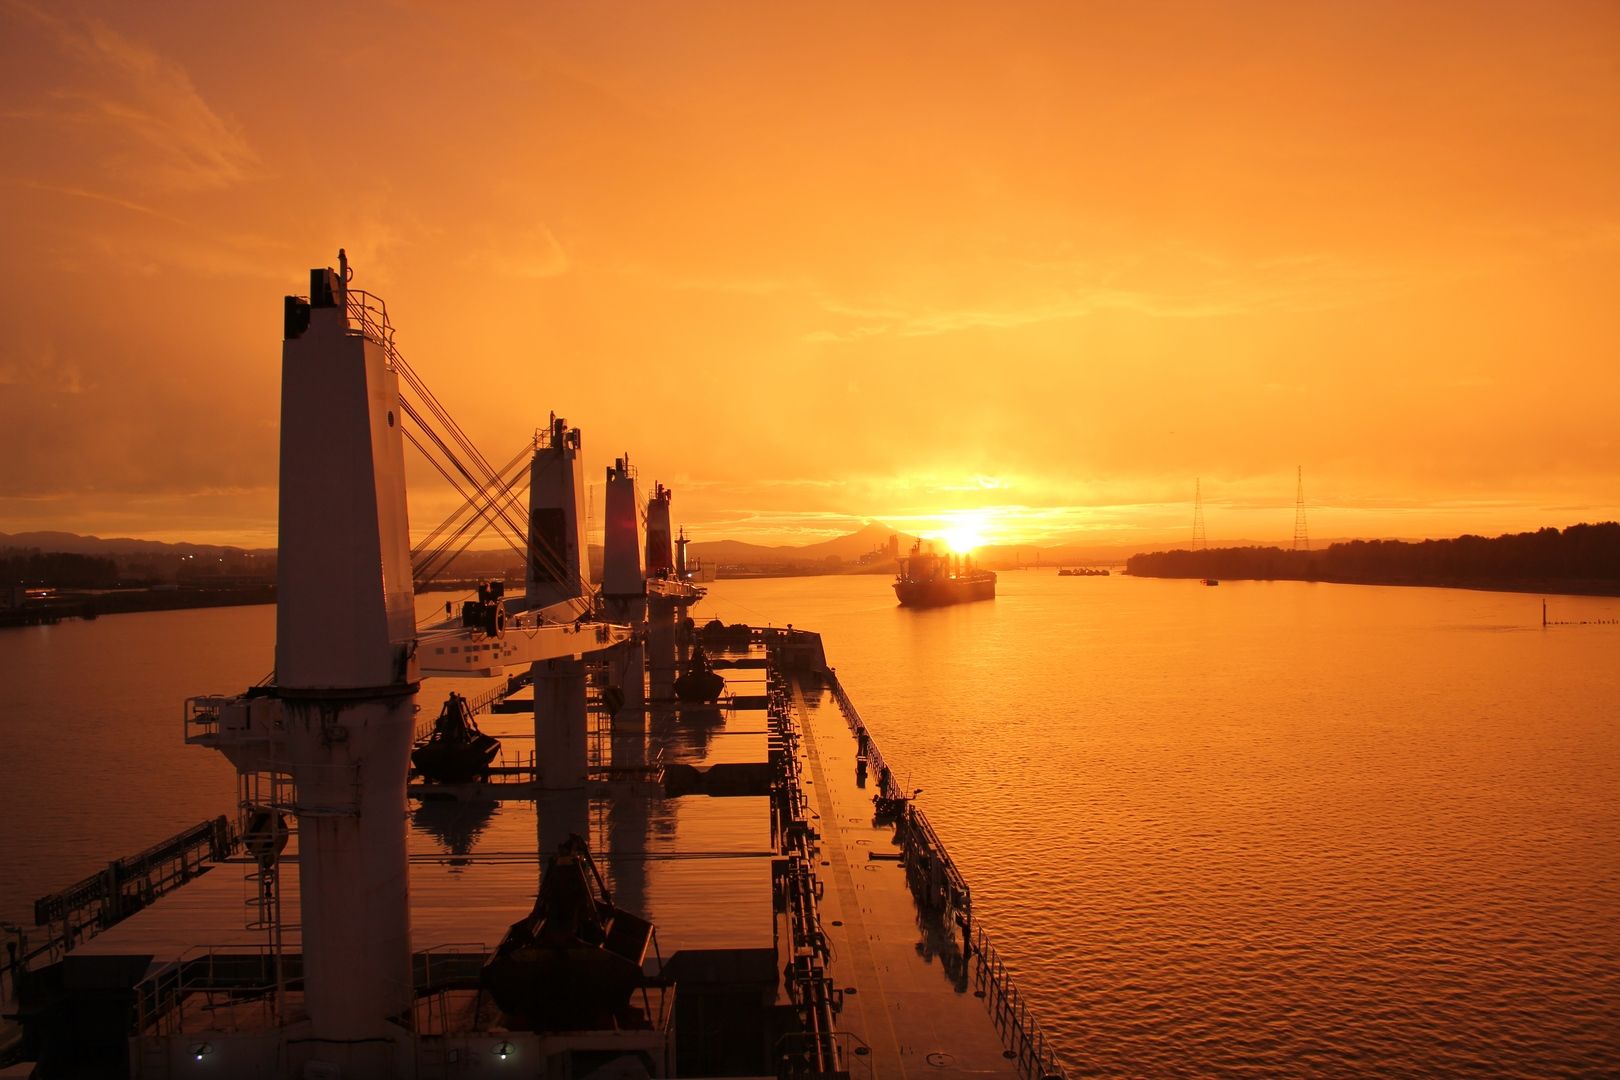 View from the bridge of a bulk carrier at sunset